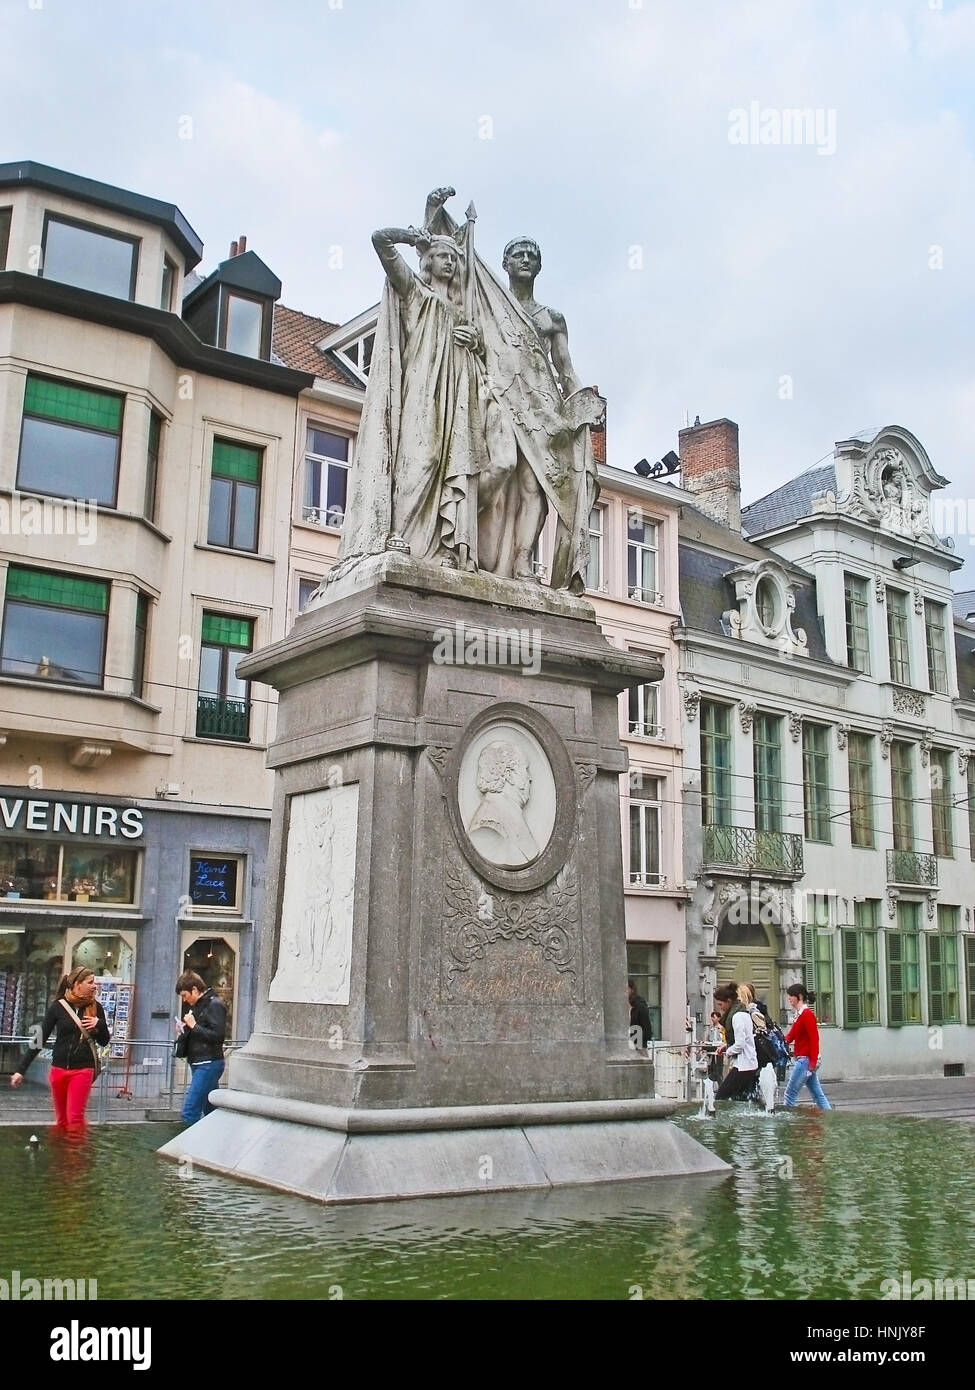 GHENT, BELGIUM - MAY 26, 2011: The monument to Jan Frans Willems surrounded by fountain and located at Sint-Baafsplein Square, on May 26 in Ghent. Stock Photo